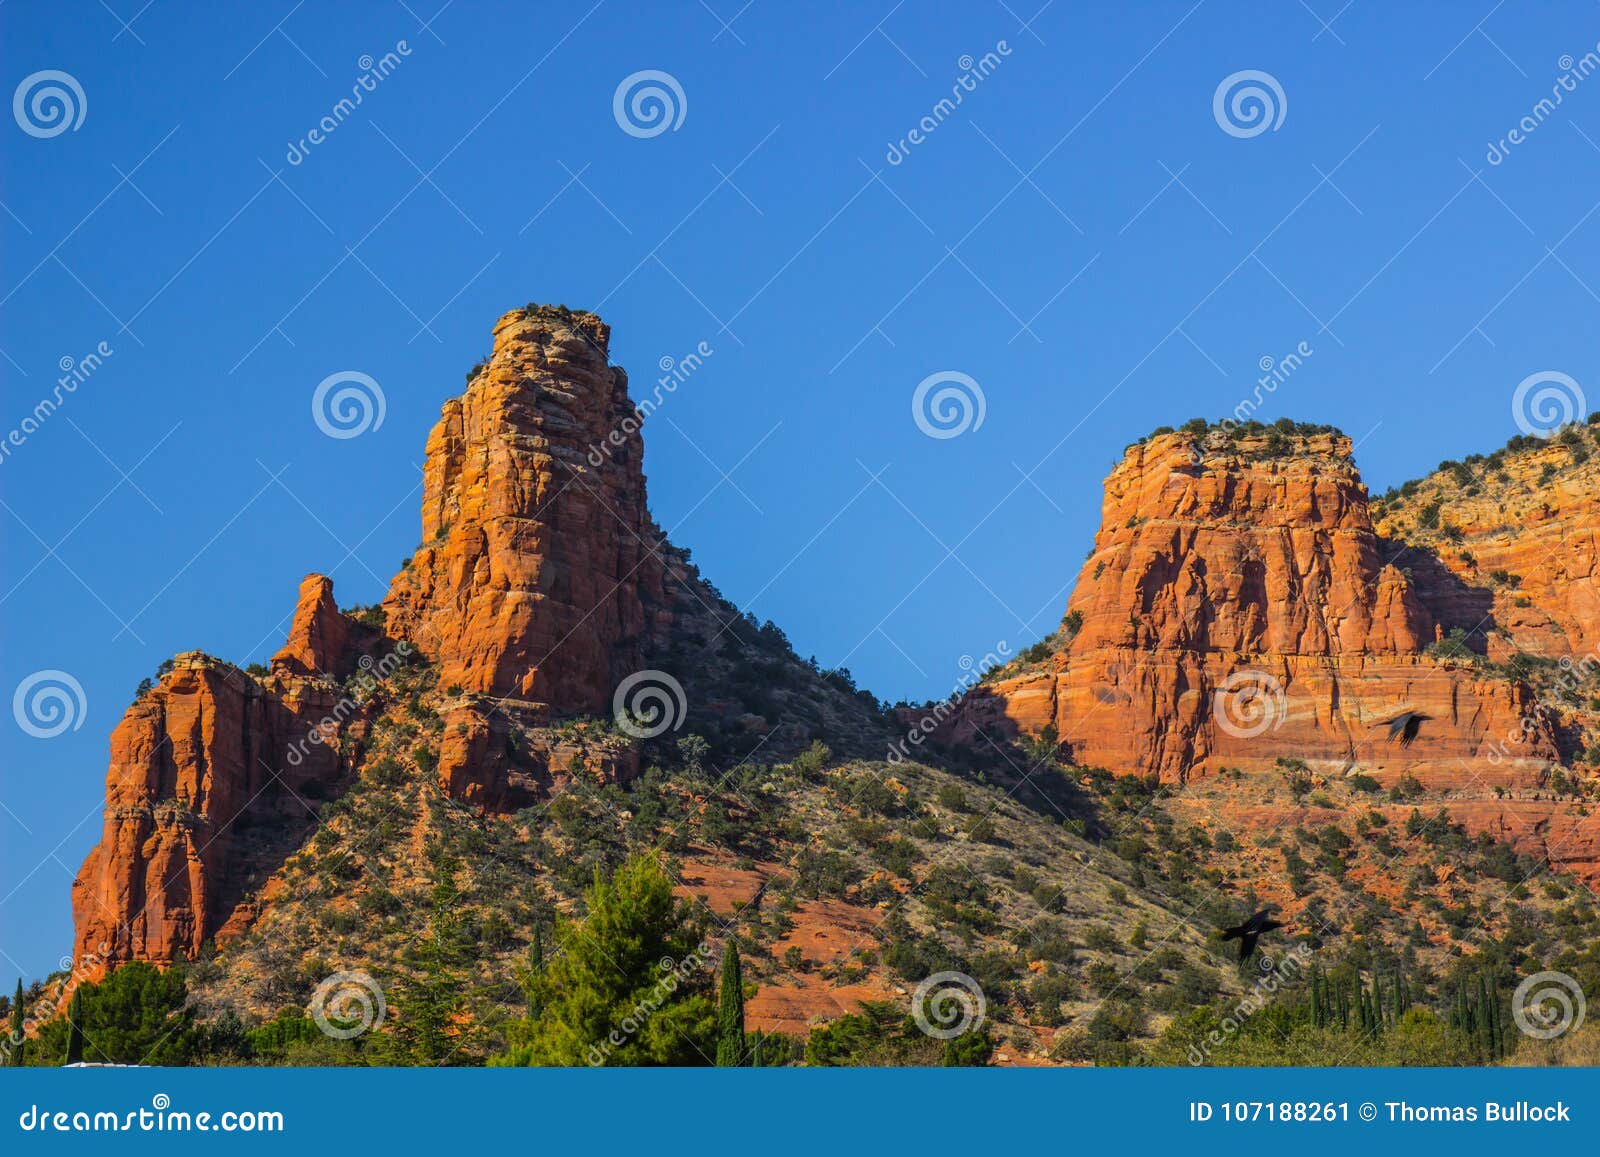 red rock outcroppings in arizona high desert